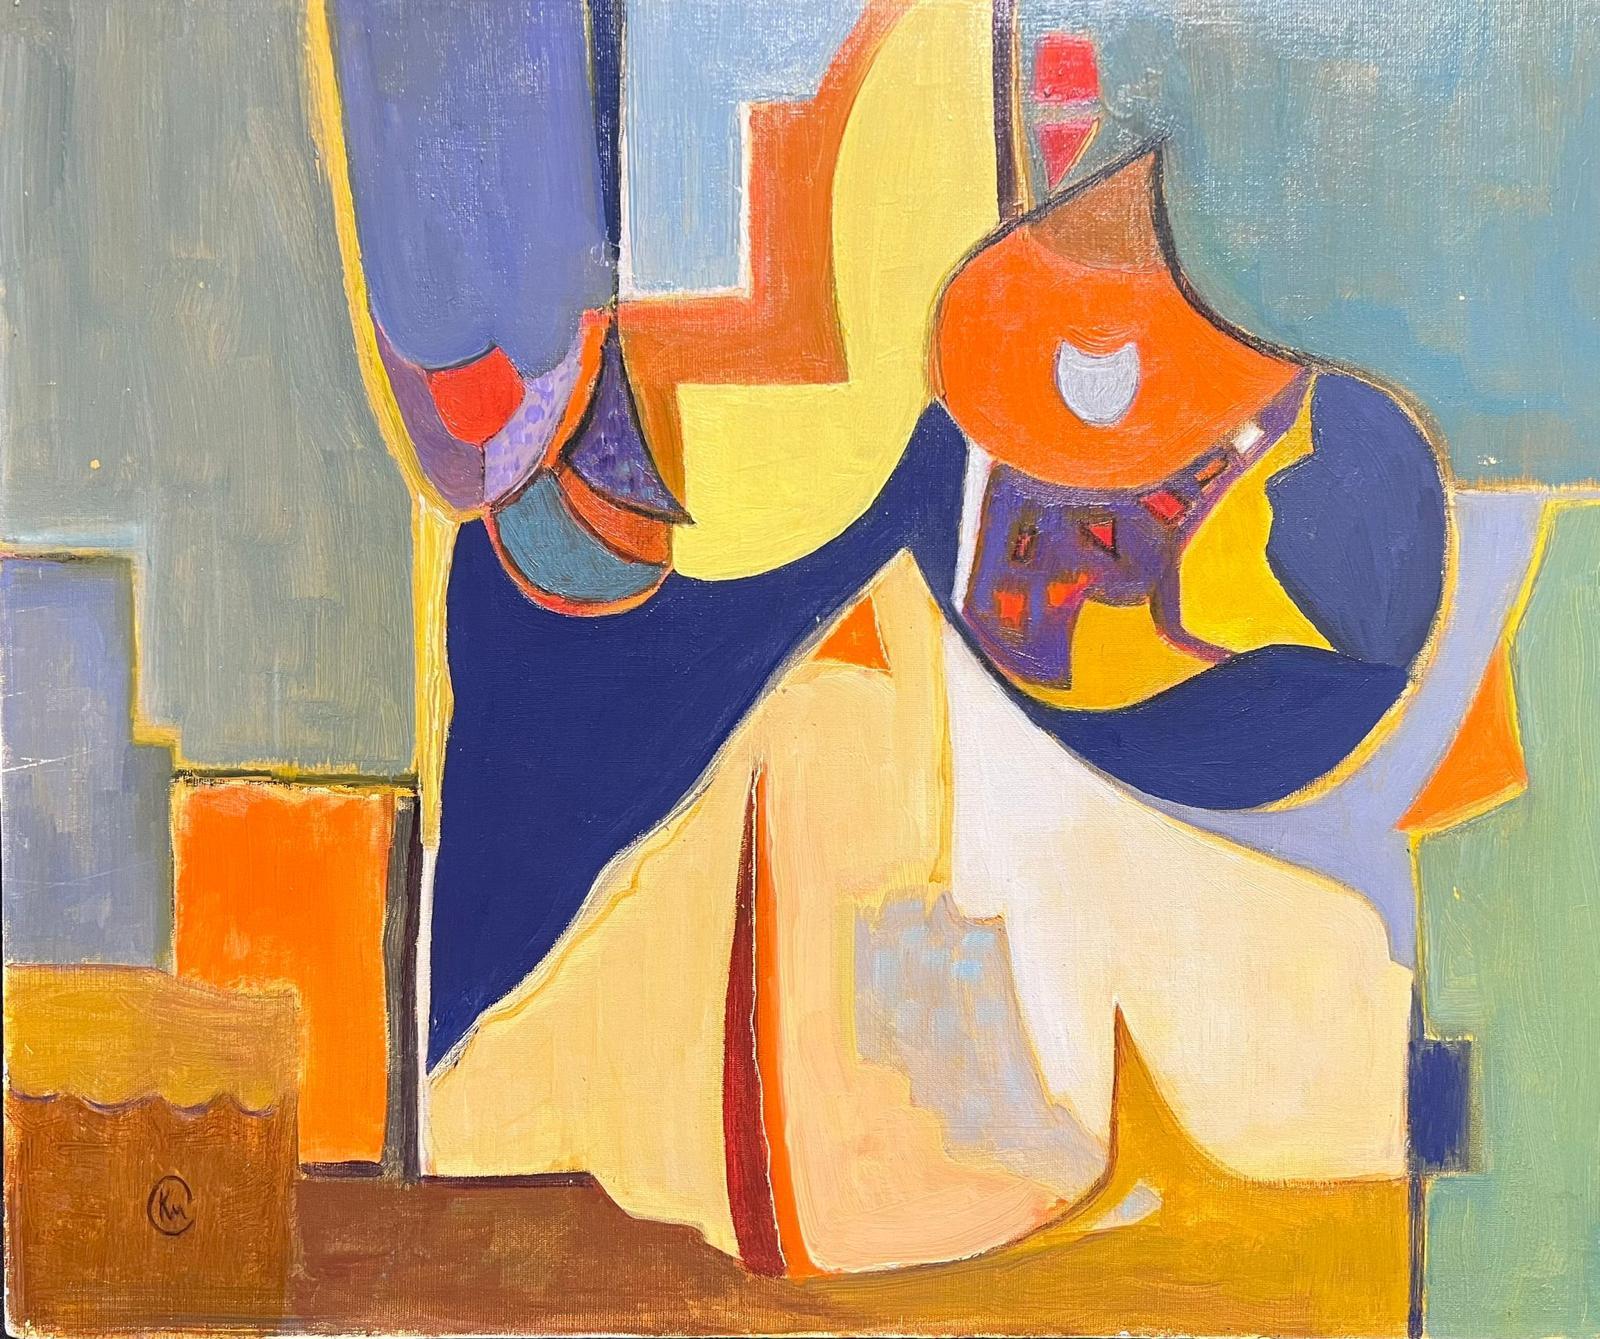 Kathleen Crow Abstract Painting - Modern British Cubist Oil Painting Still Life Composition Large Original Signed